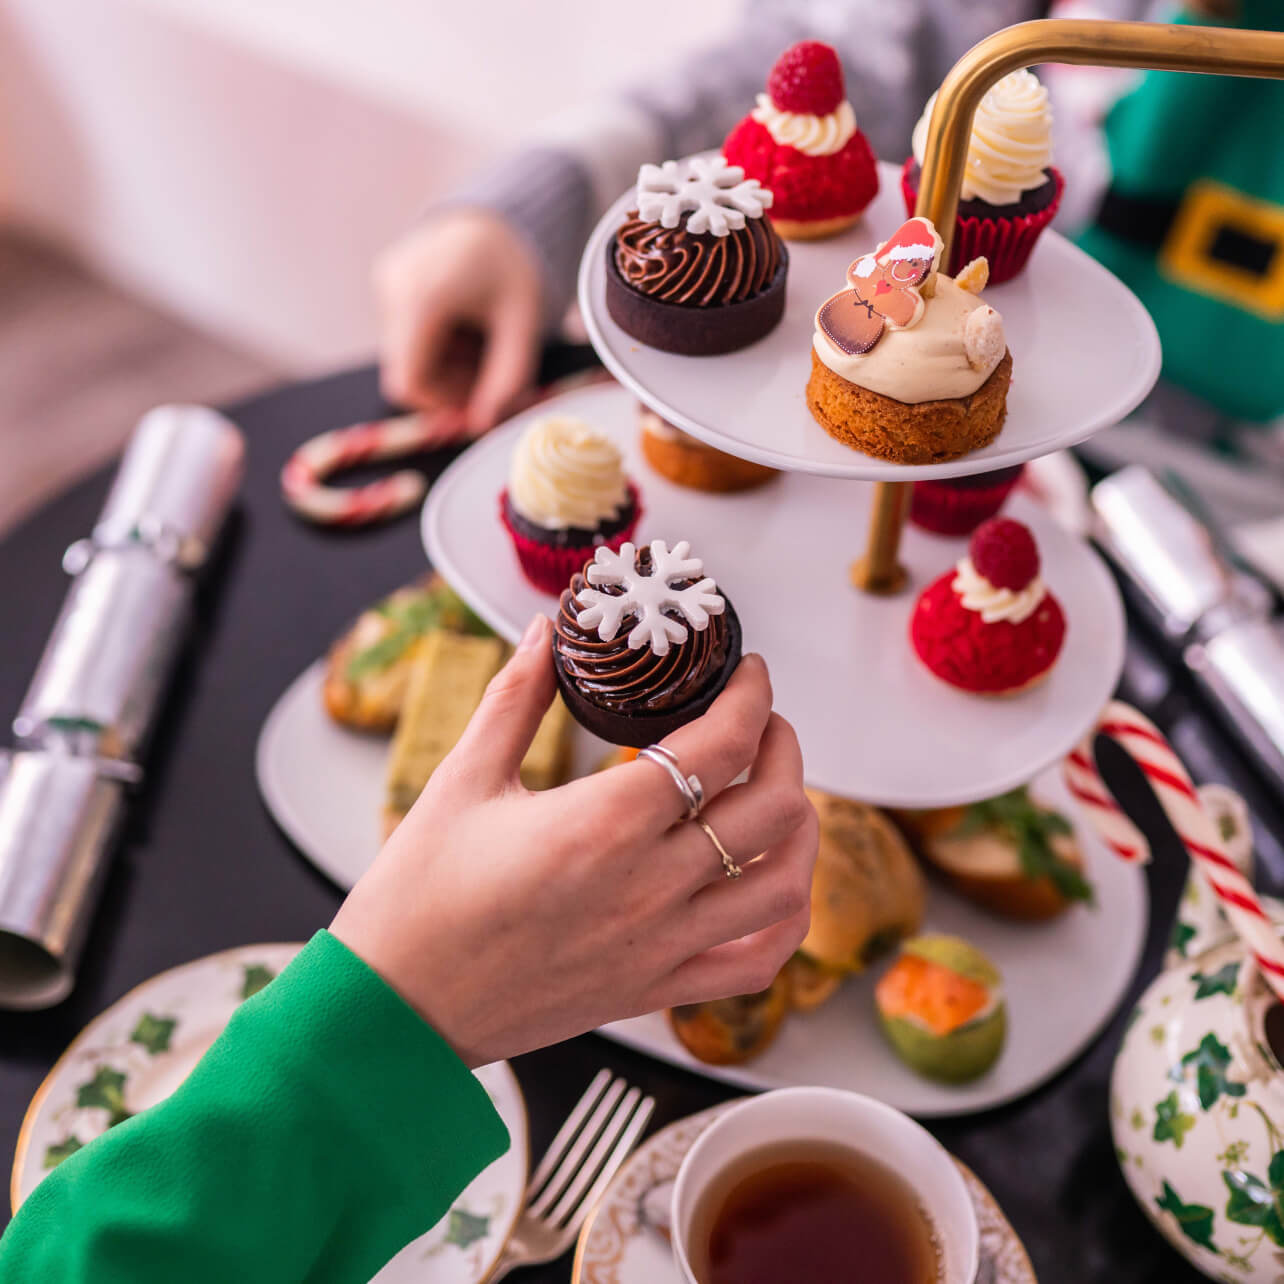 Festive Afternoon Tea served at Brigit's Bakery, Covent Garden